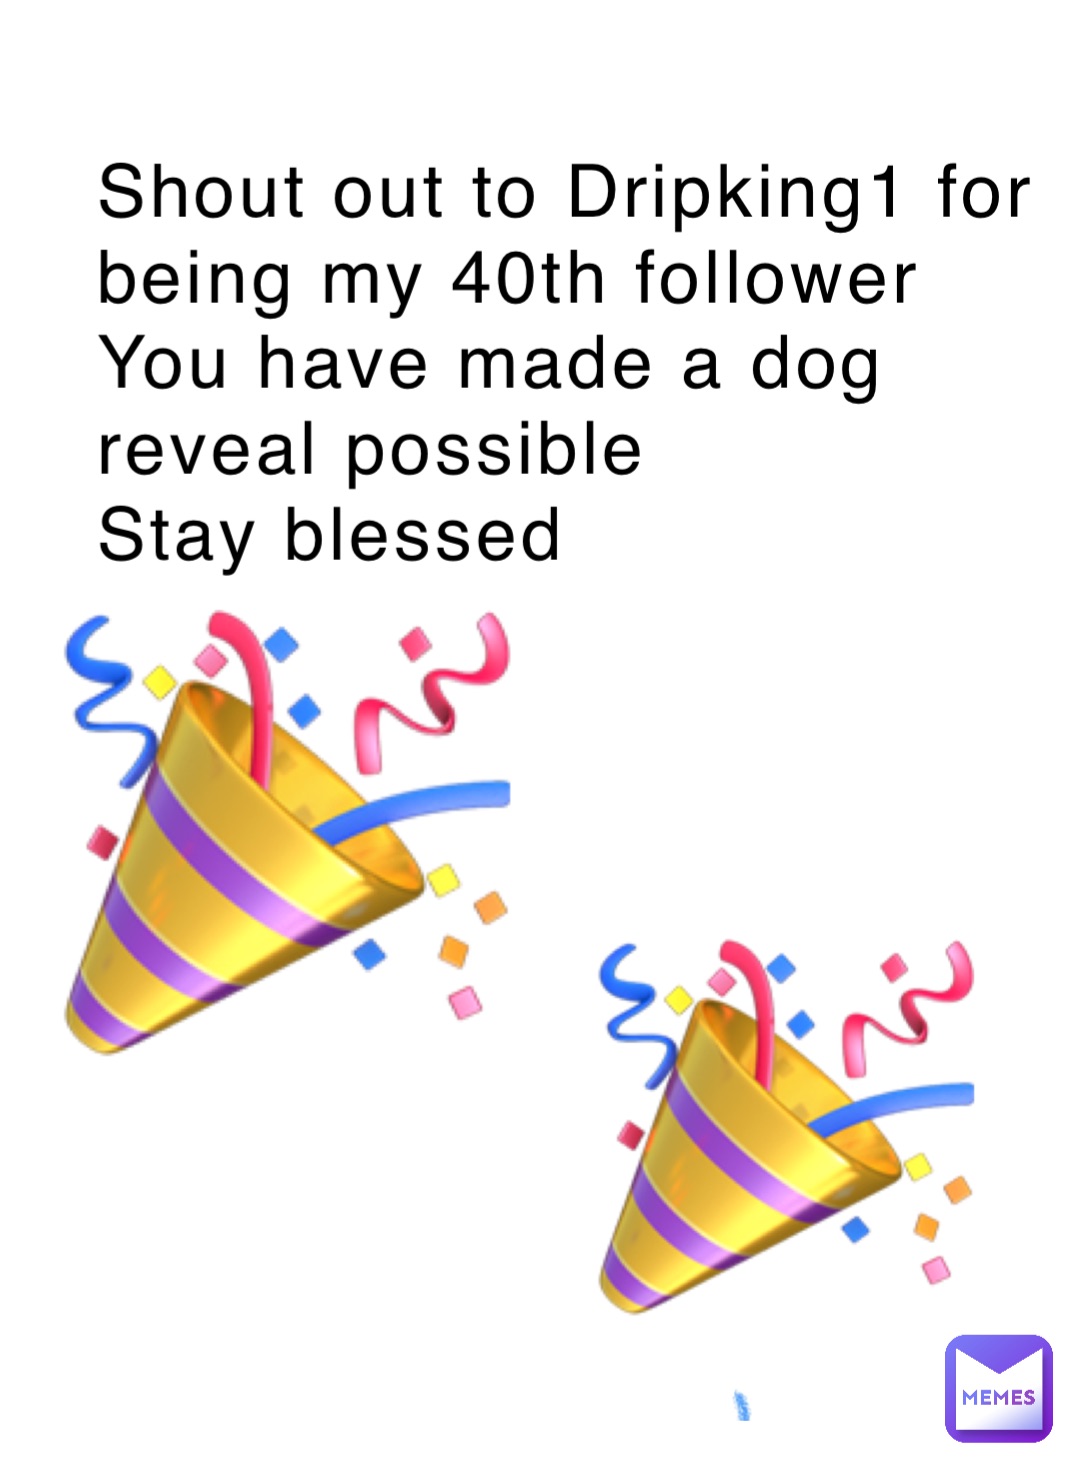 Shout out to Dripking1 for being my 40th follower 
You have made a dog reveal possible 
Stay blessed 🎉 🎉